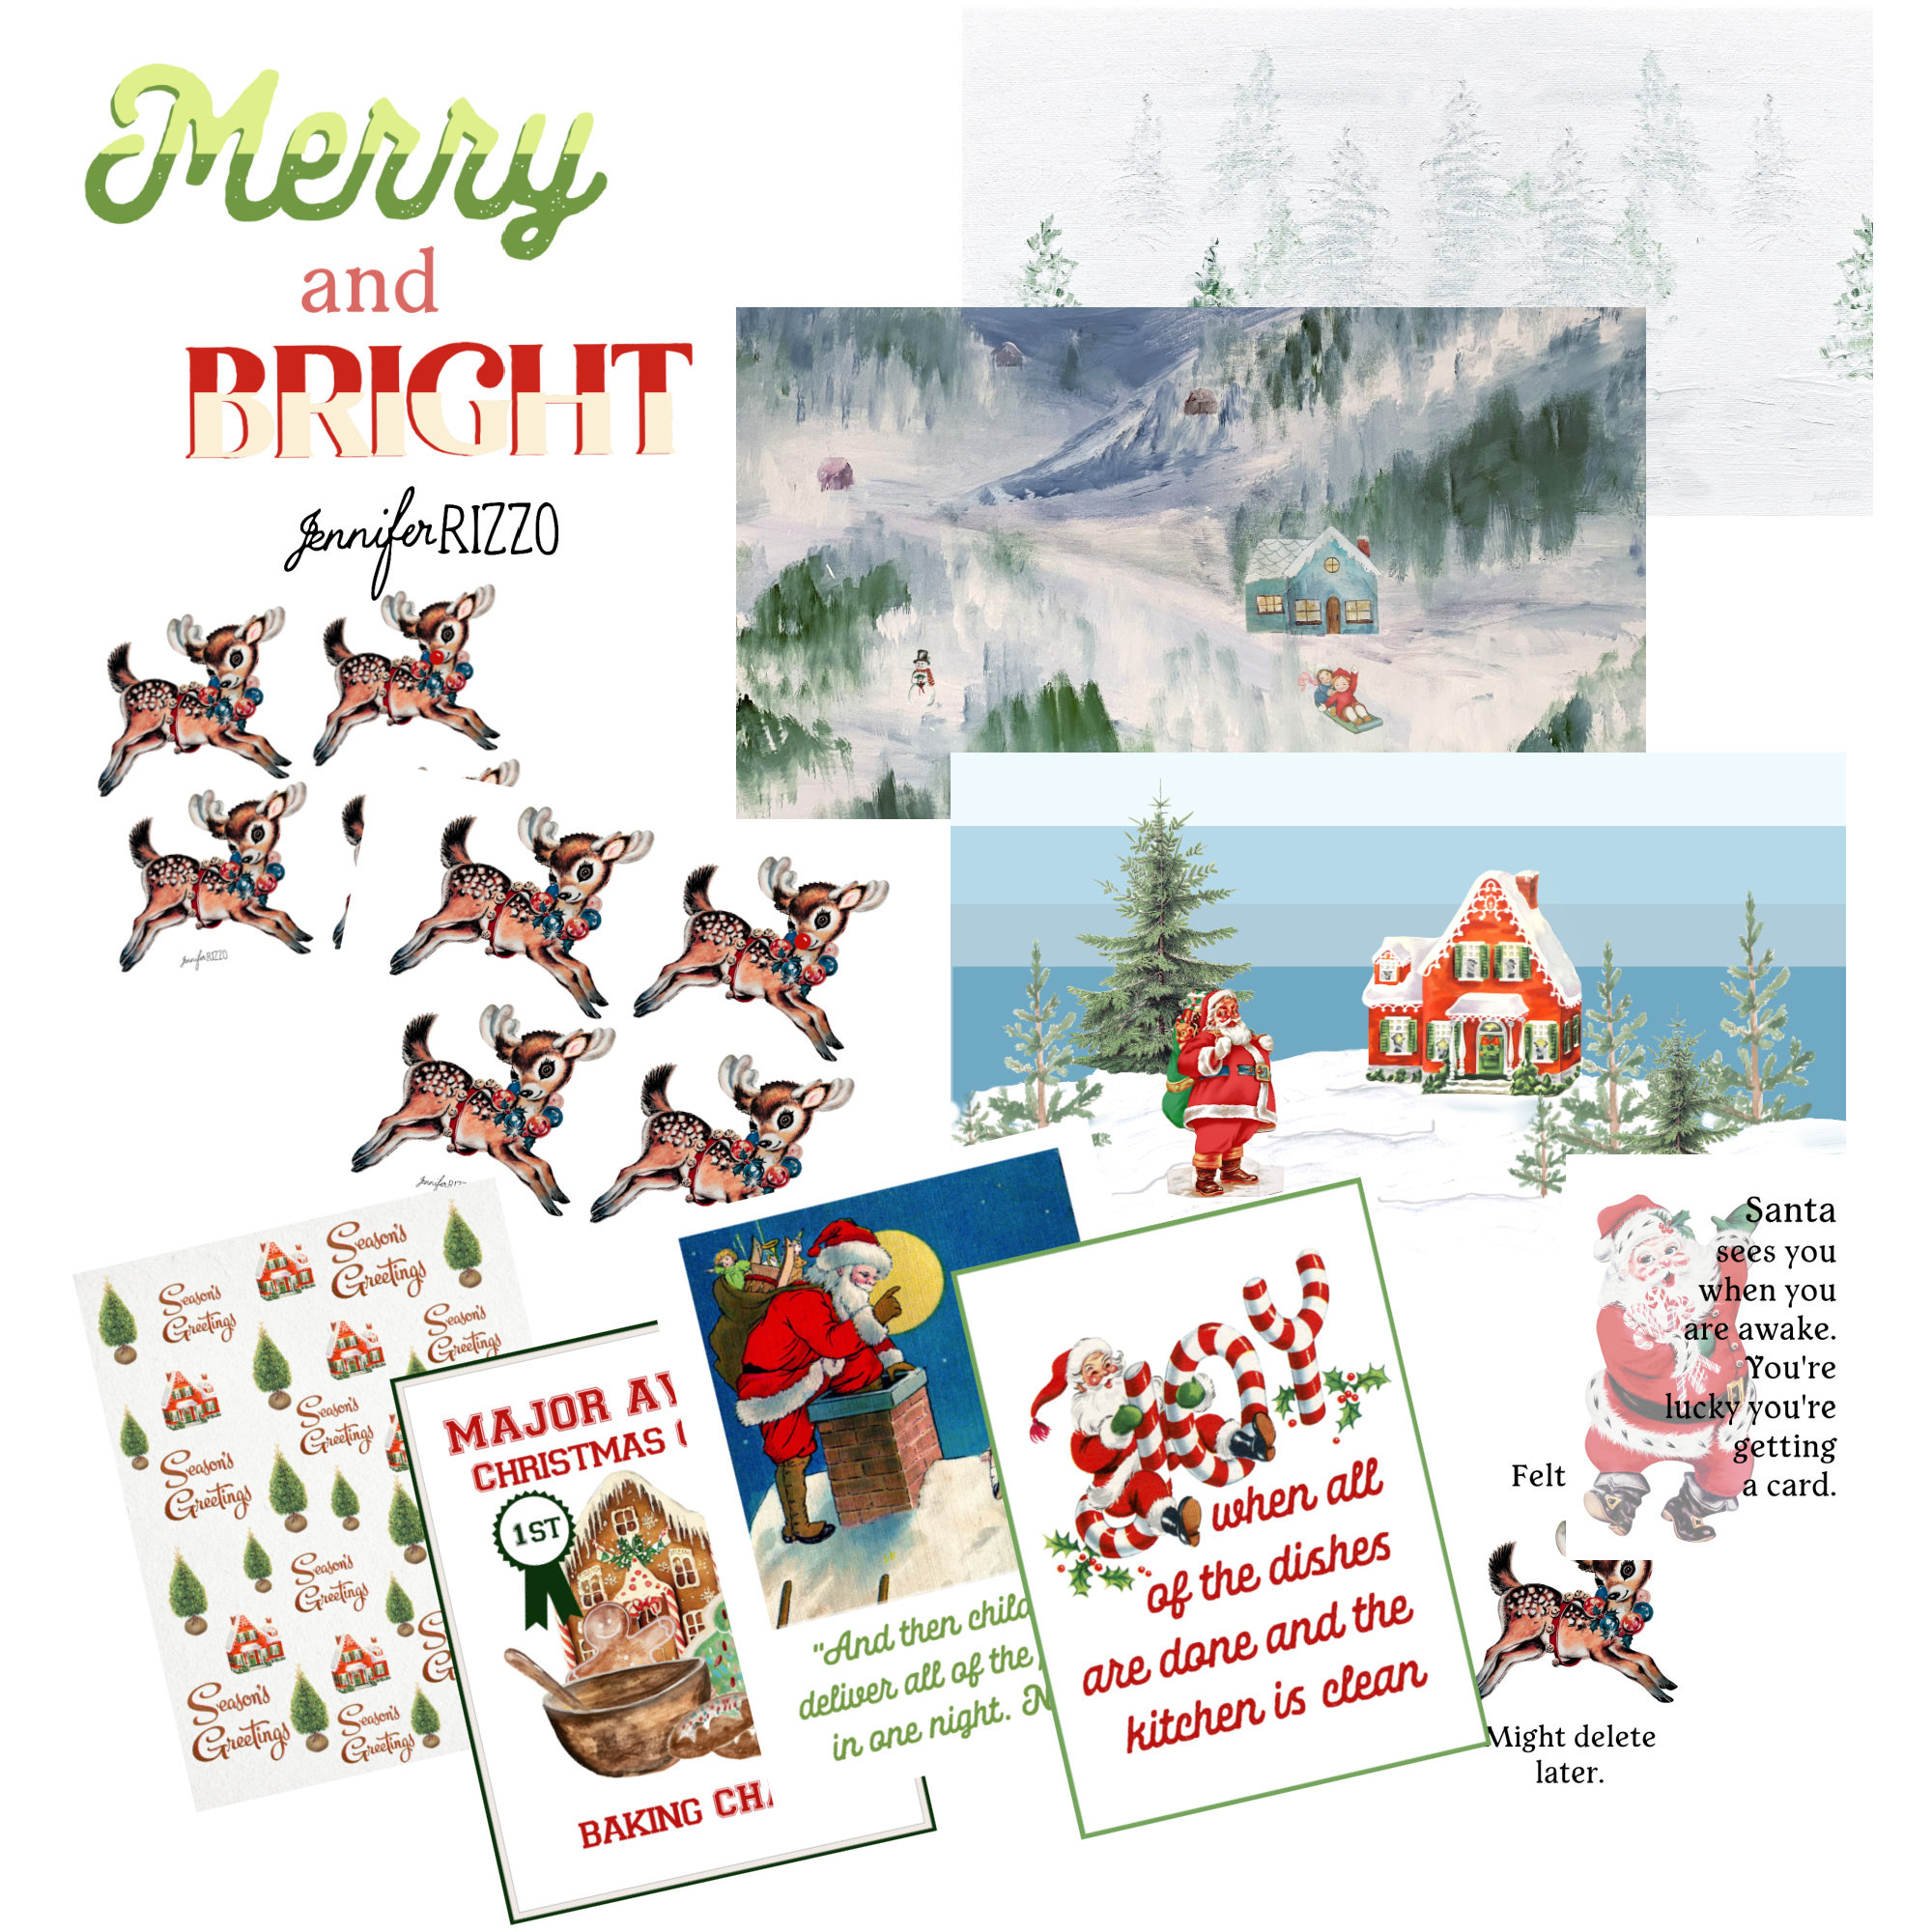 Merry and bright lettering with vintage images of Santa, winter scenes and reindeer